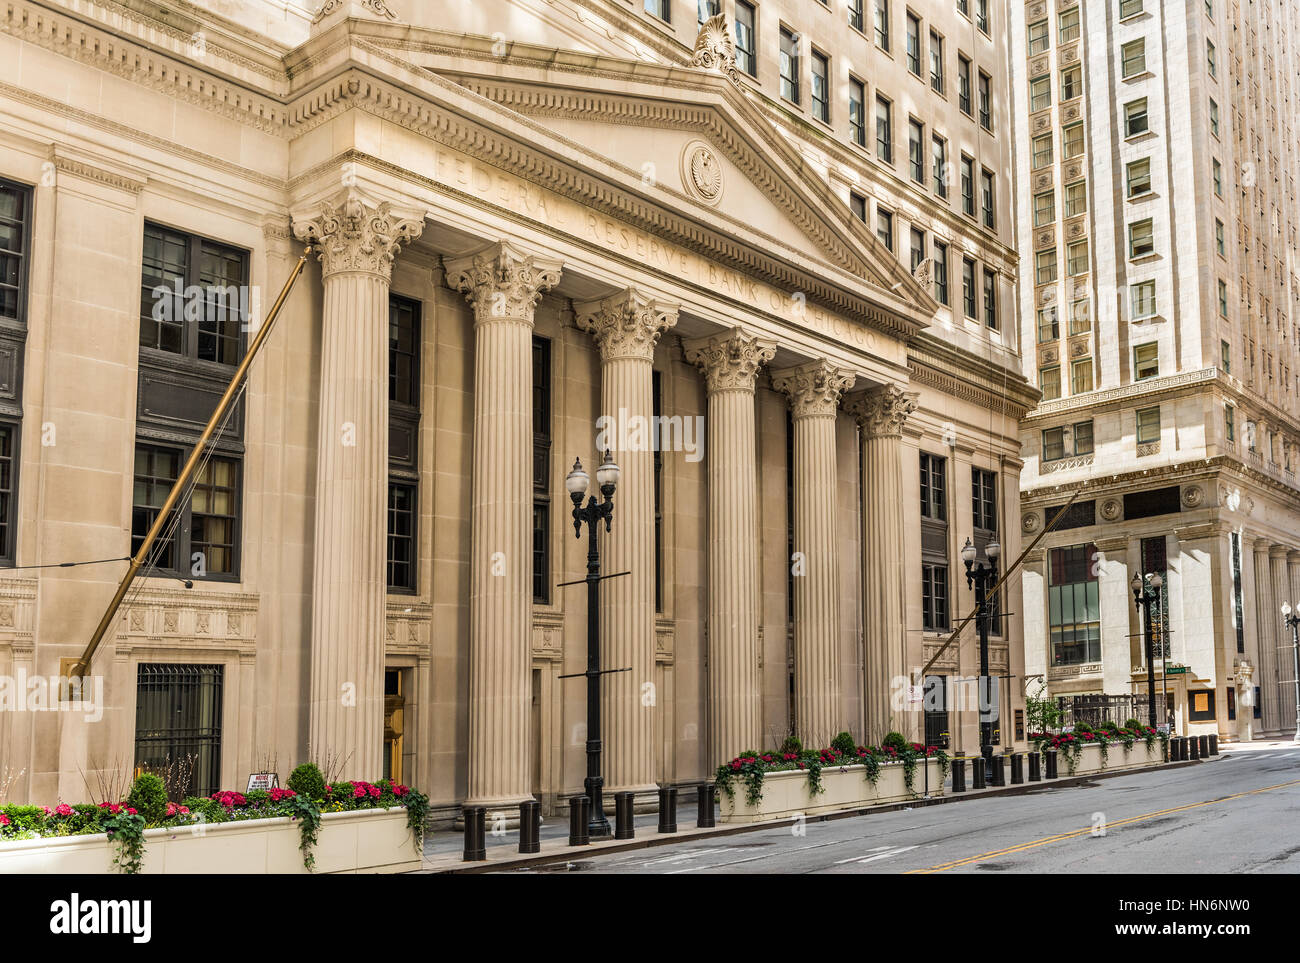 Chicago, USA - May 30, 2016: Federal Reserve Bank building on La Salle street with columns Stock Photo